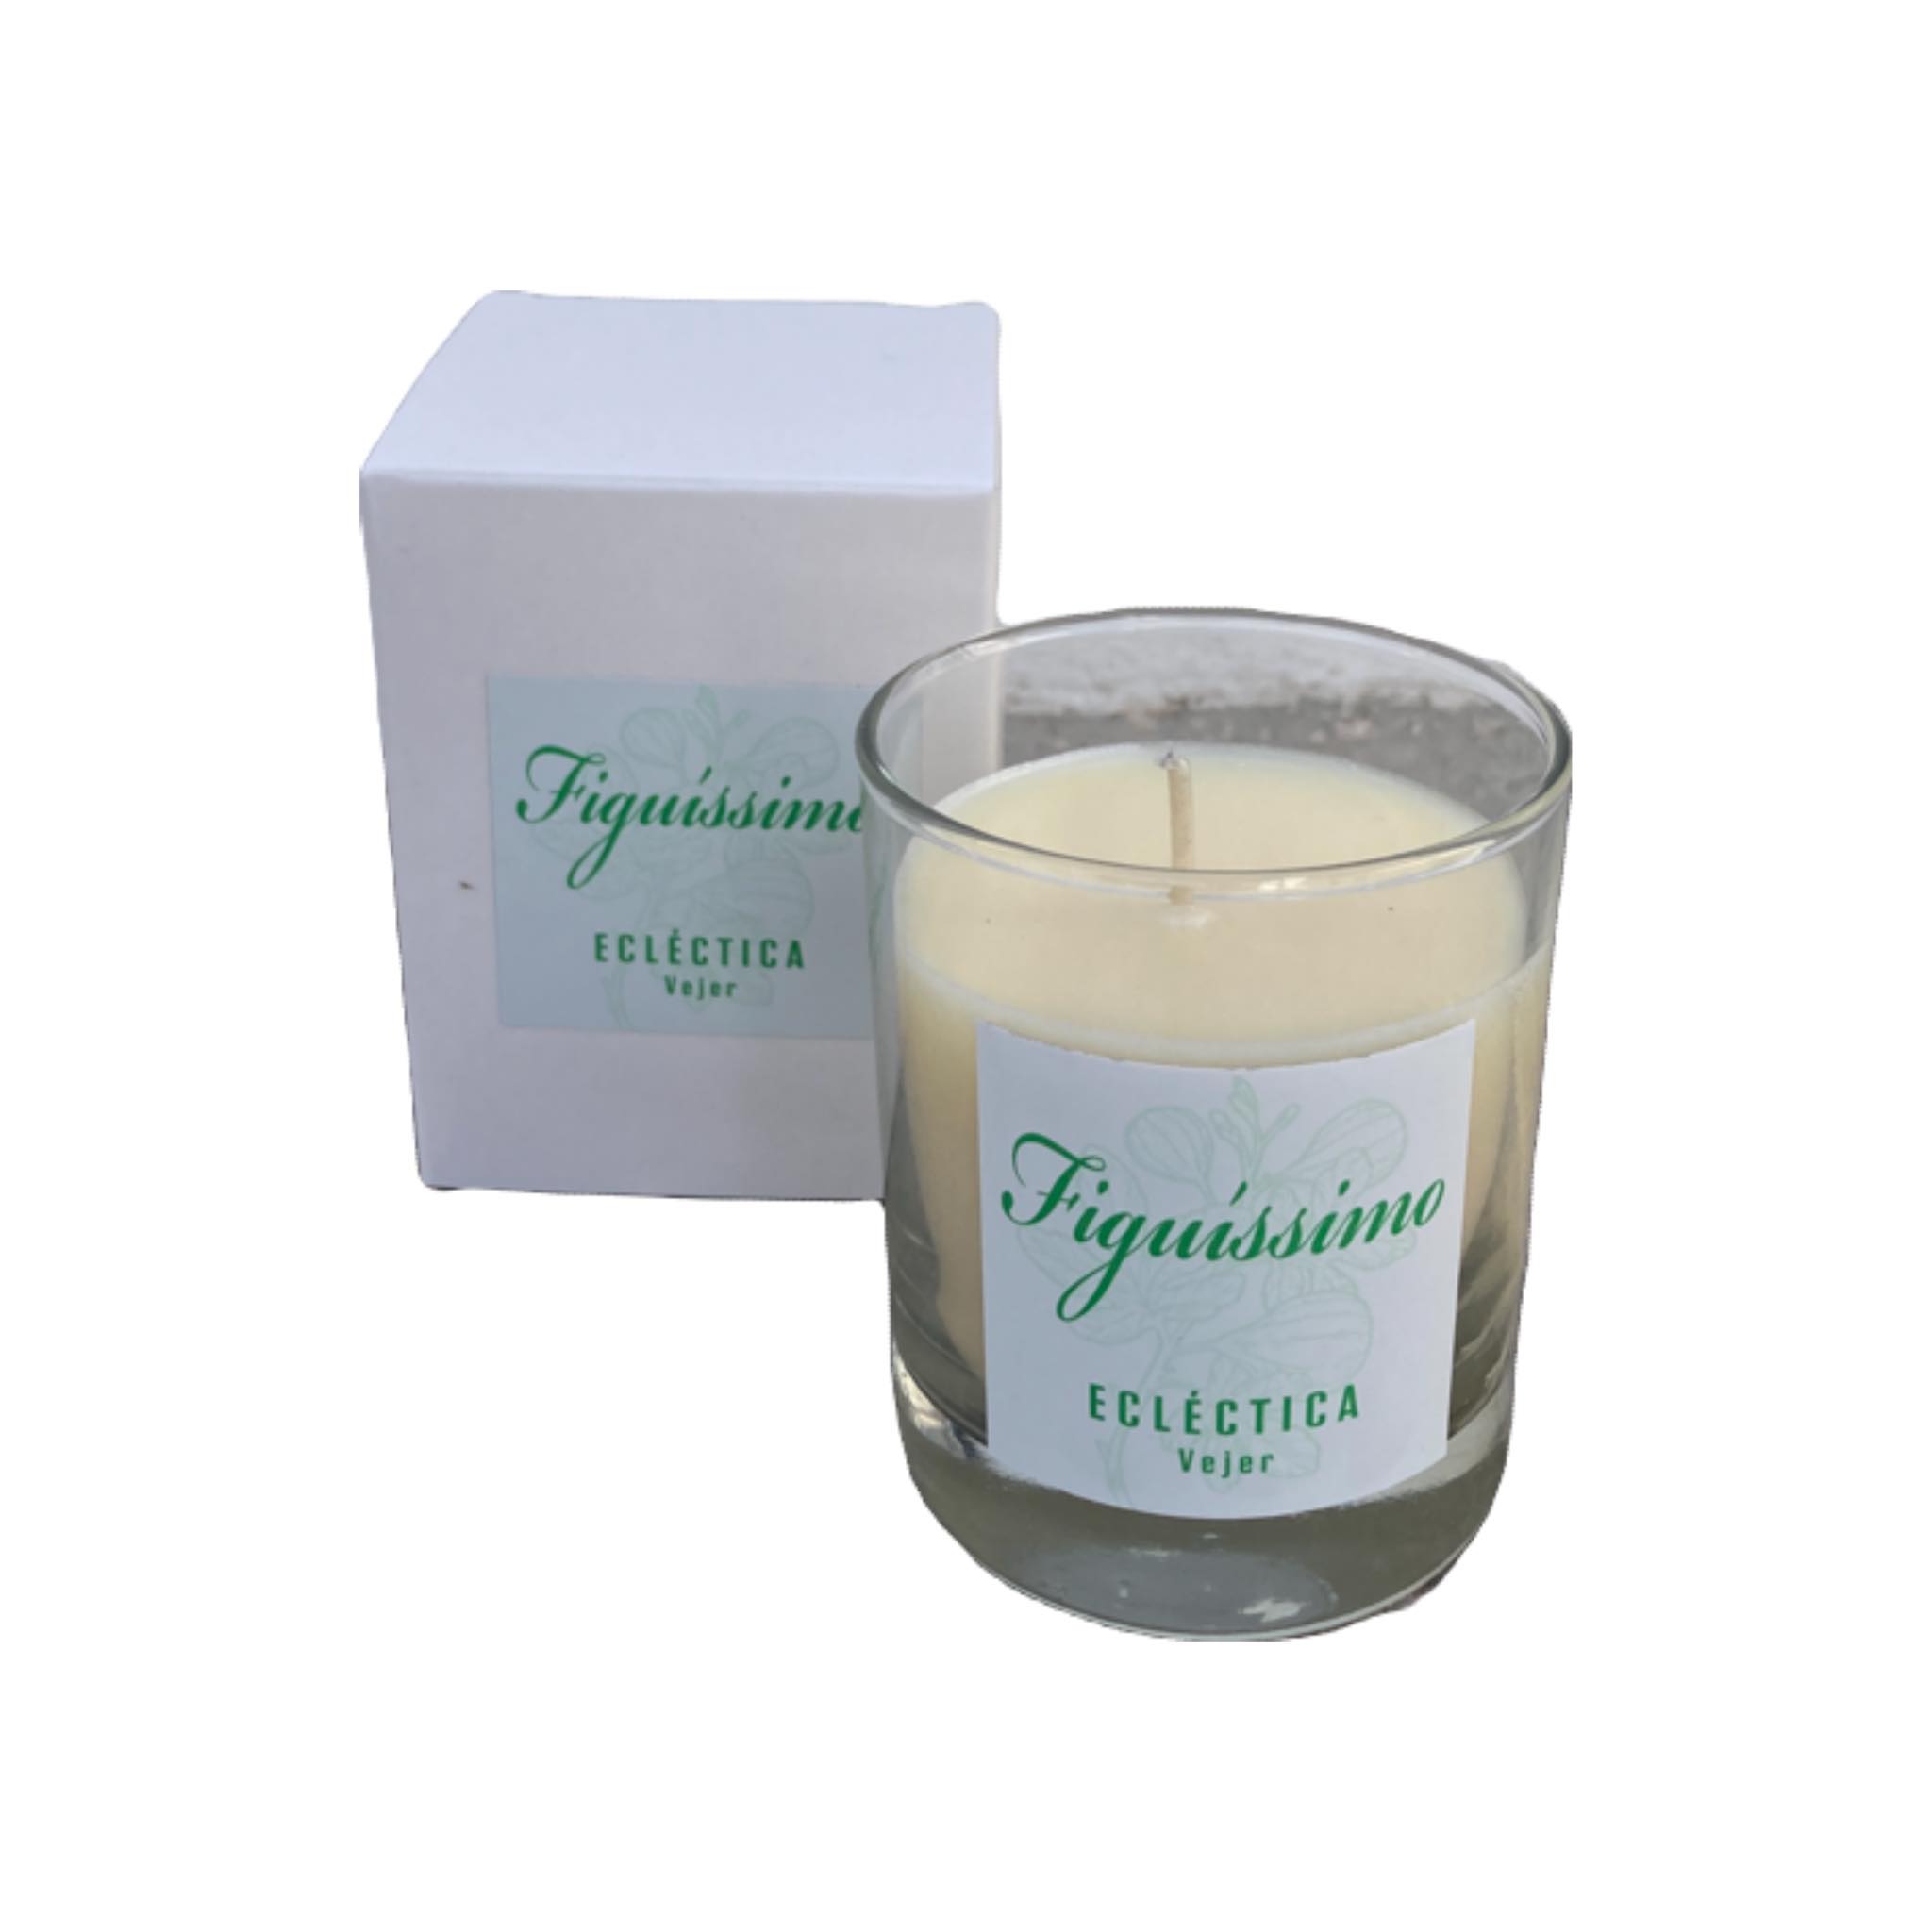 Eclectica Deco Figuissimo Fig Candle Eclectica Vejer